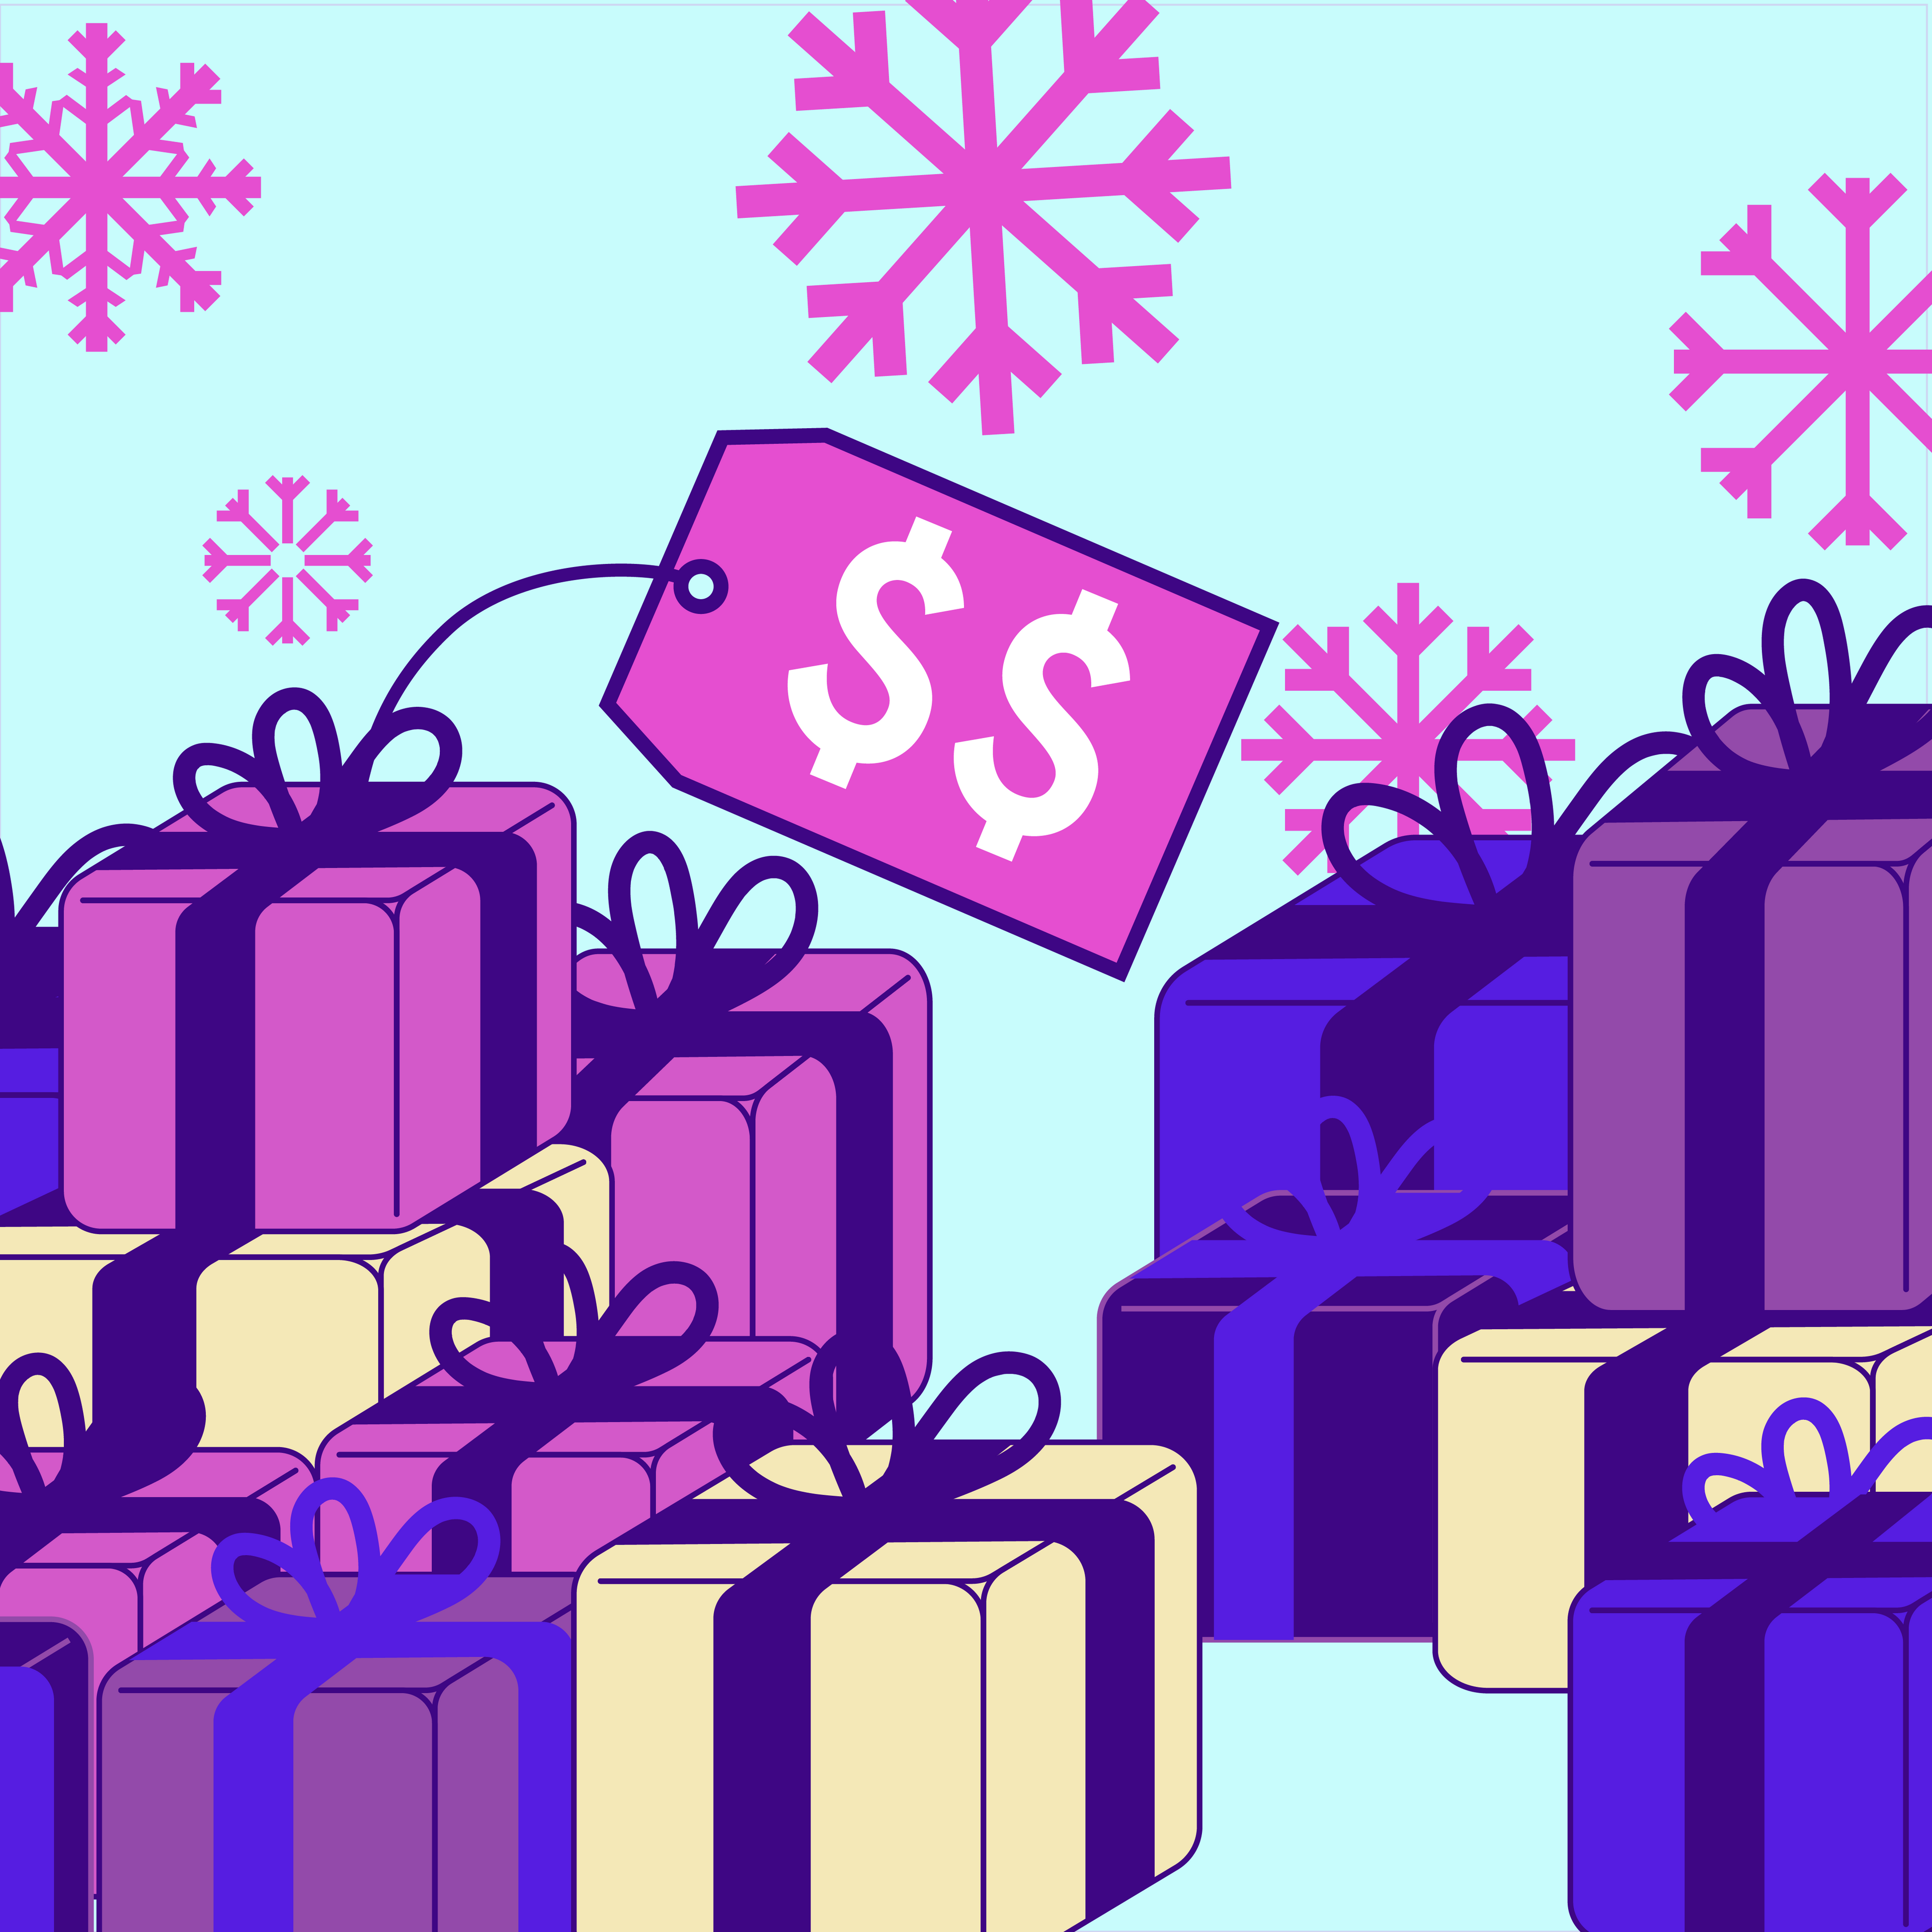 7 Ultimate Ways To Survive The Holidays - Financially